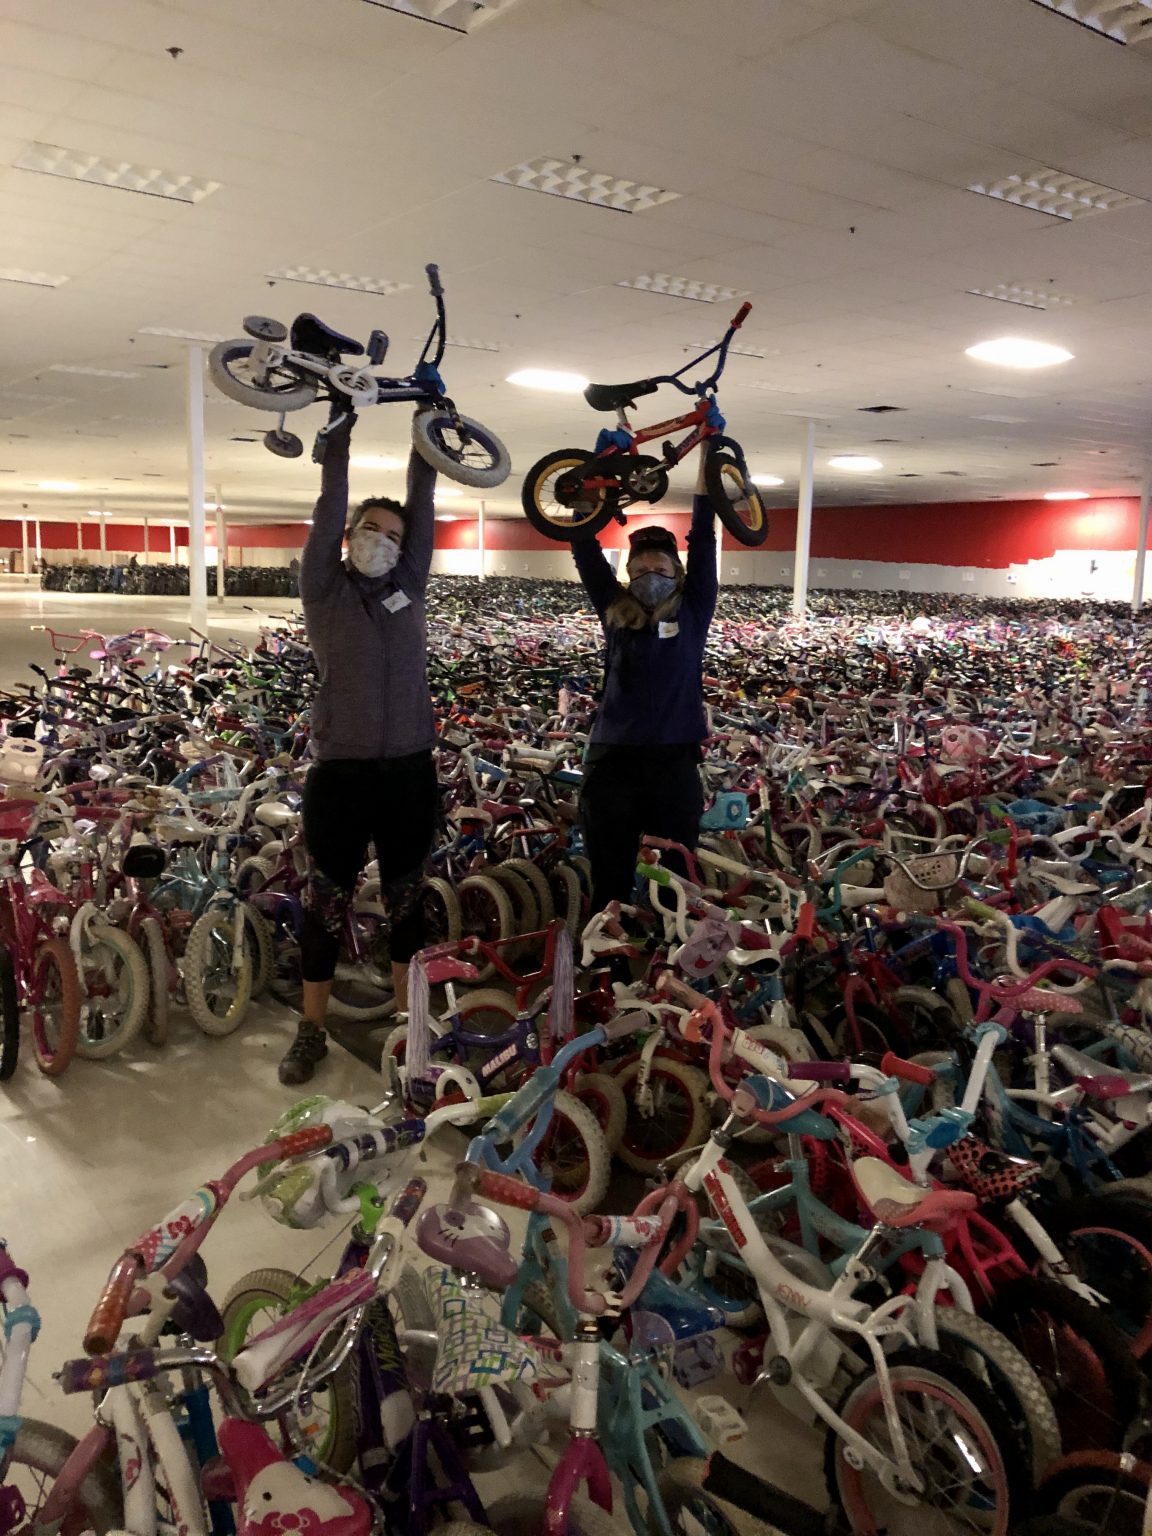 7006 BIKES IN 4 HOURS!